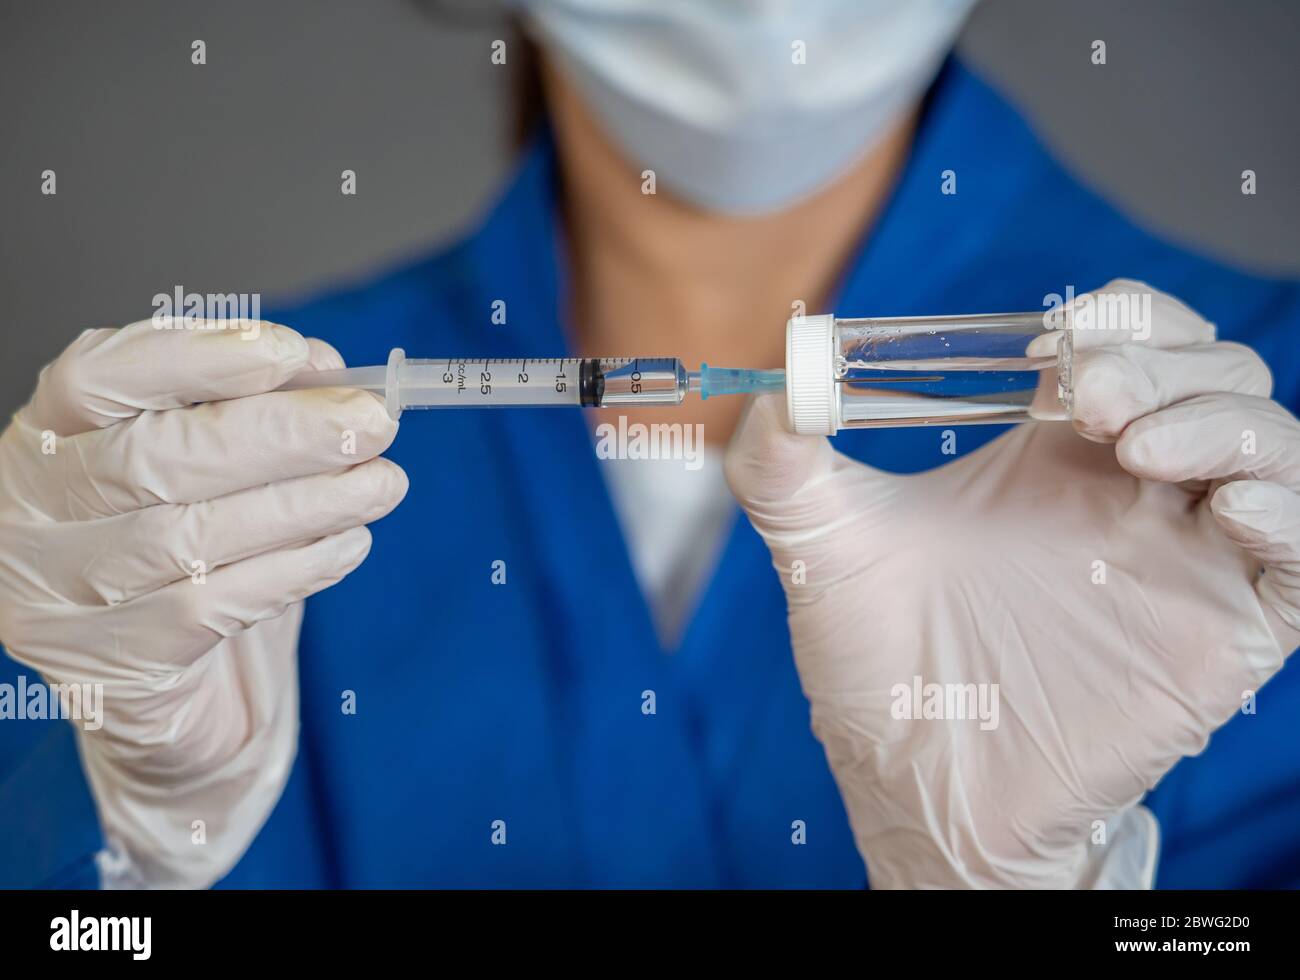 COVID-19 Coronavirus Vaccine. Doctor scientist with syringe analyzing virus Sars-CoV-2 in research for vaccine to be ready for clinical trial. Female Stock Photo